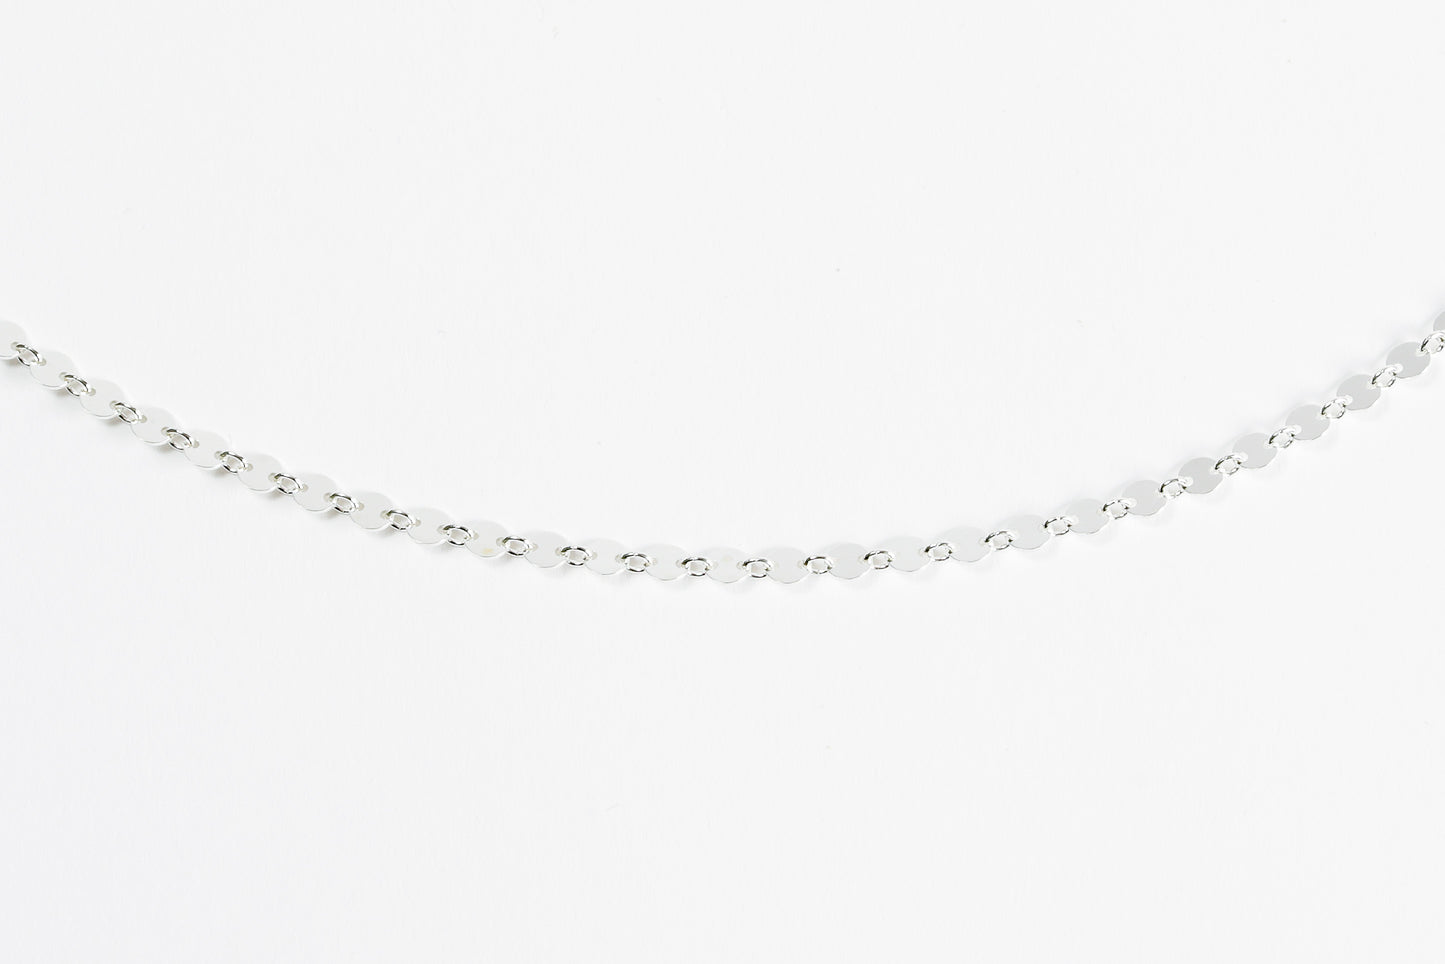 Disc Chain Necklace